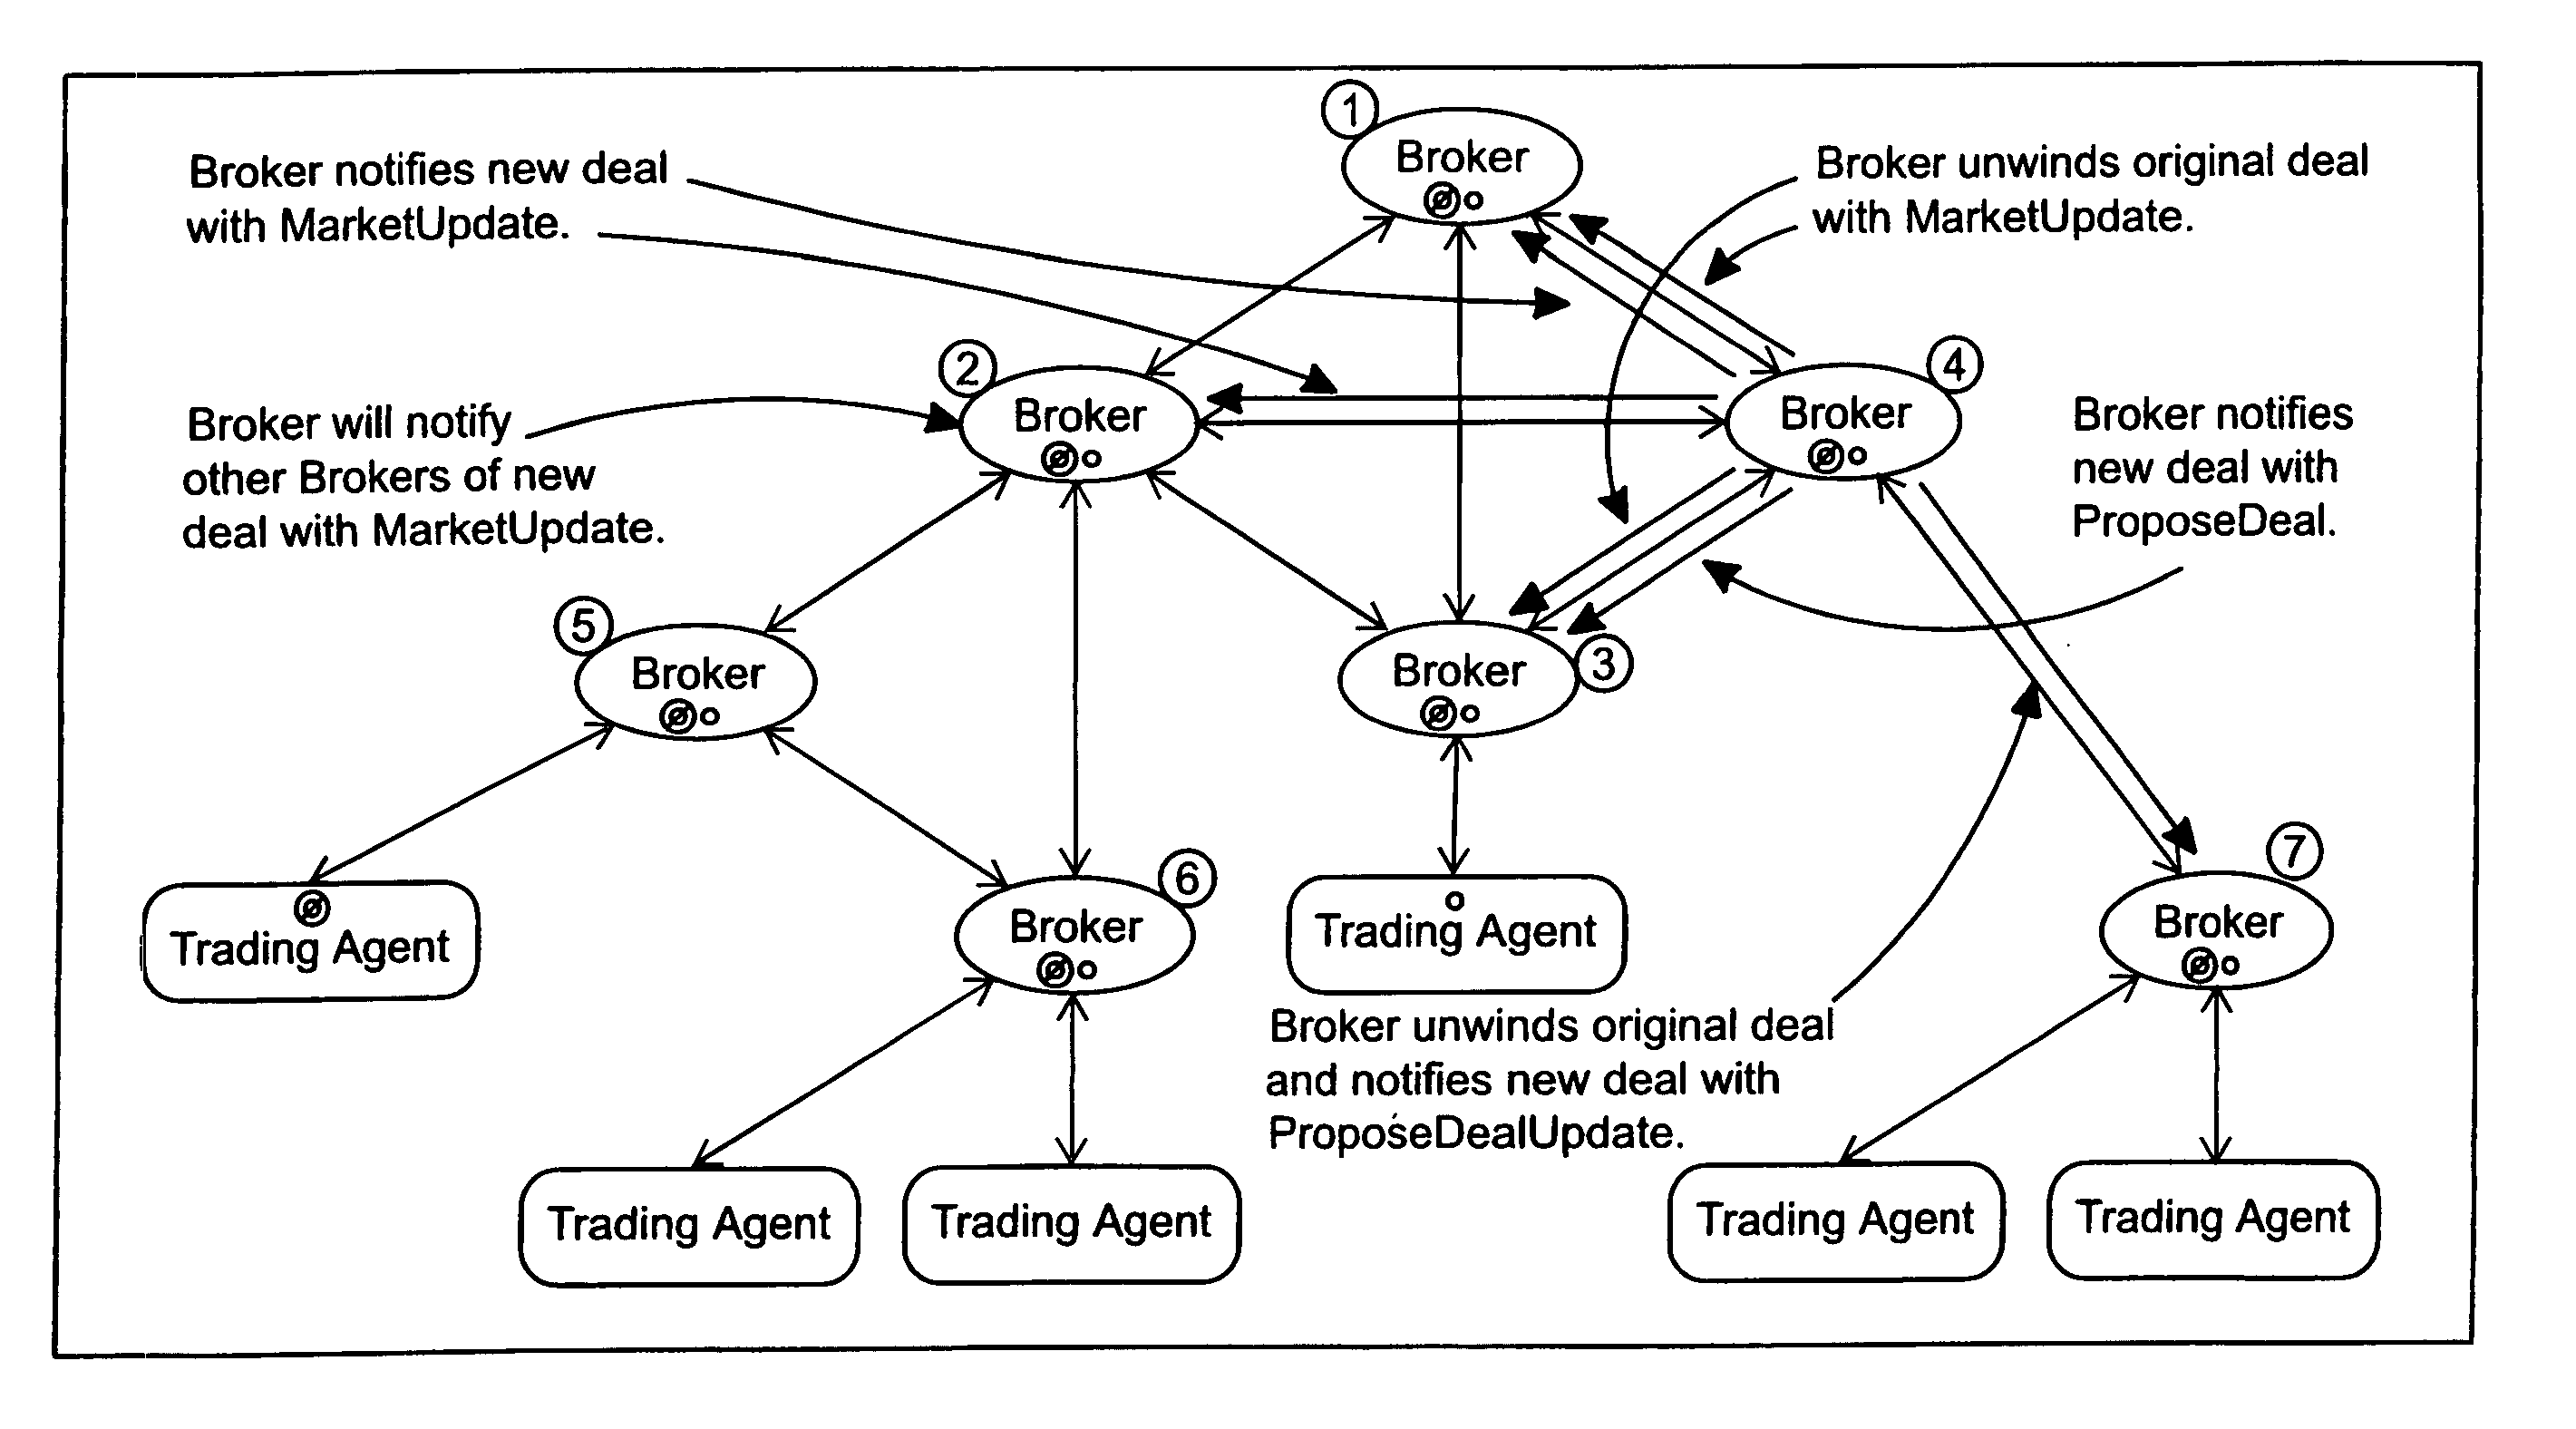 Conversational dealing in an anonymous trading system